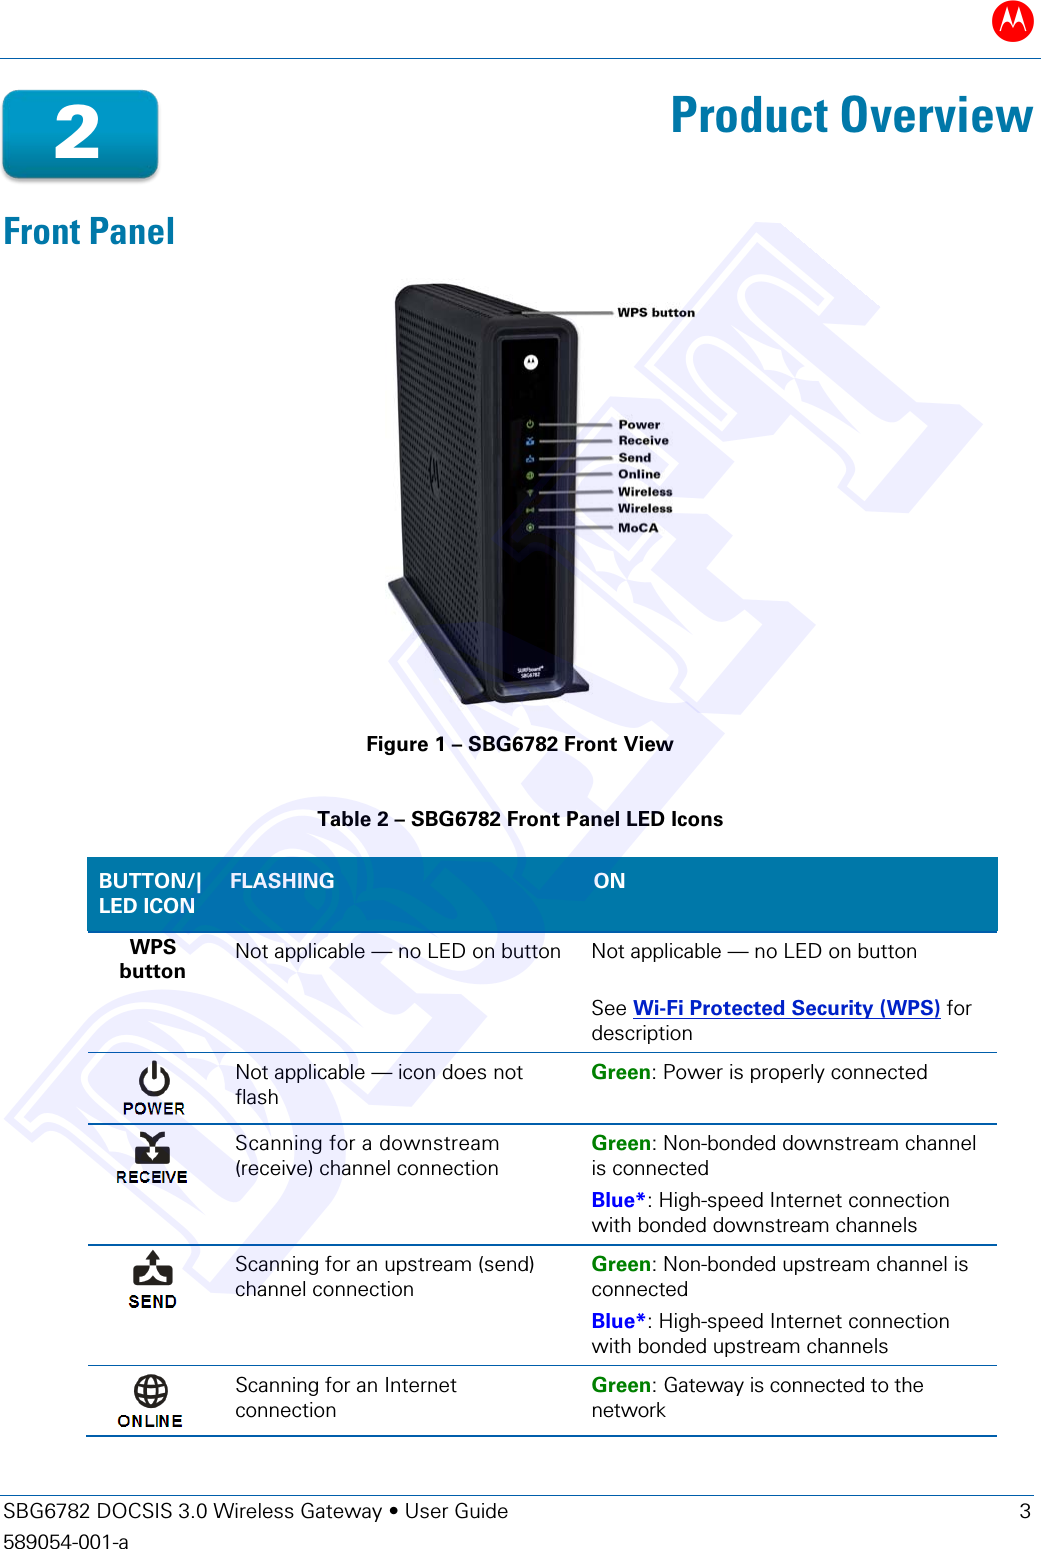 B   SBG6782 DOCSIS 3.0 Wireless Gateway • User Guide 3 589054-001-a                  2  Product Overview Front Panel  Figure 1 – SBG6782 Front View  Table 2 – SBG6782 Front Panel LED Icons BUTTON/|LED ICON FLASHING  ON  WPS button Not applicable — no LED on button   Not applicable — no LED on button  See Wi-Fi Protected Security (WPS) for description  Not applicable — icon does not flash Green: Power is properly connected  Scanning for a downstream (receive) channel connection Green: Non-bonded downstream channel is connected Blue*: High-speed Internet connection with bonded downstream channels  Scanning for an upstream (send) channel connection Green: Non-bonded upstream channel is connected Blue*: High-speed Internet connection with bonded upstream channels  Scanning for an Internet connection Green: Gateway is connected to the network DRAFT